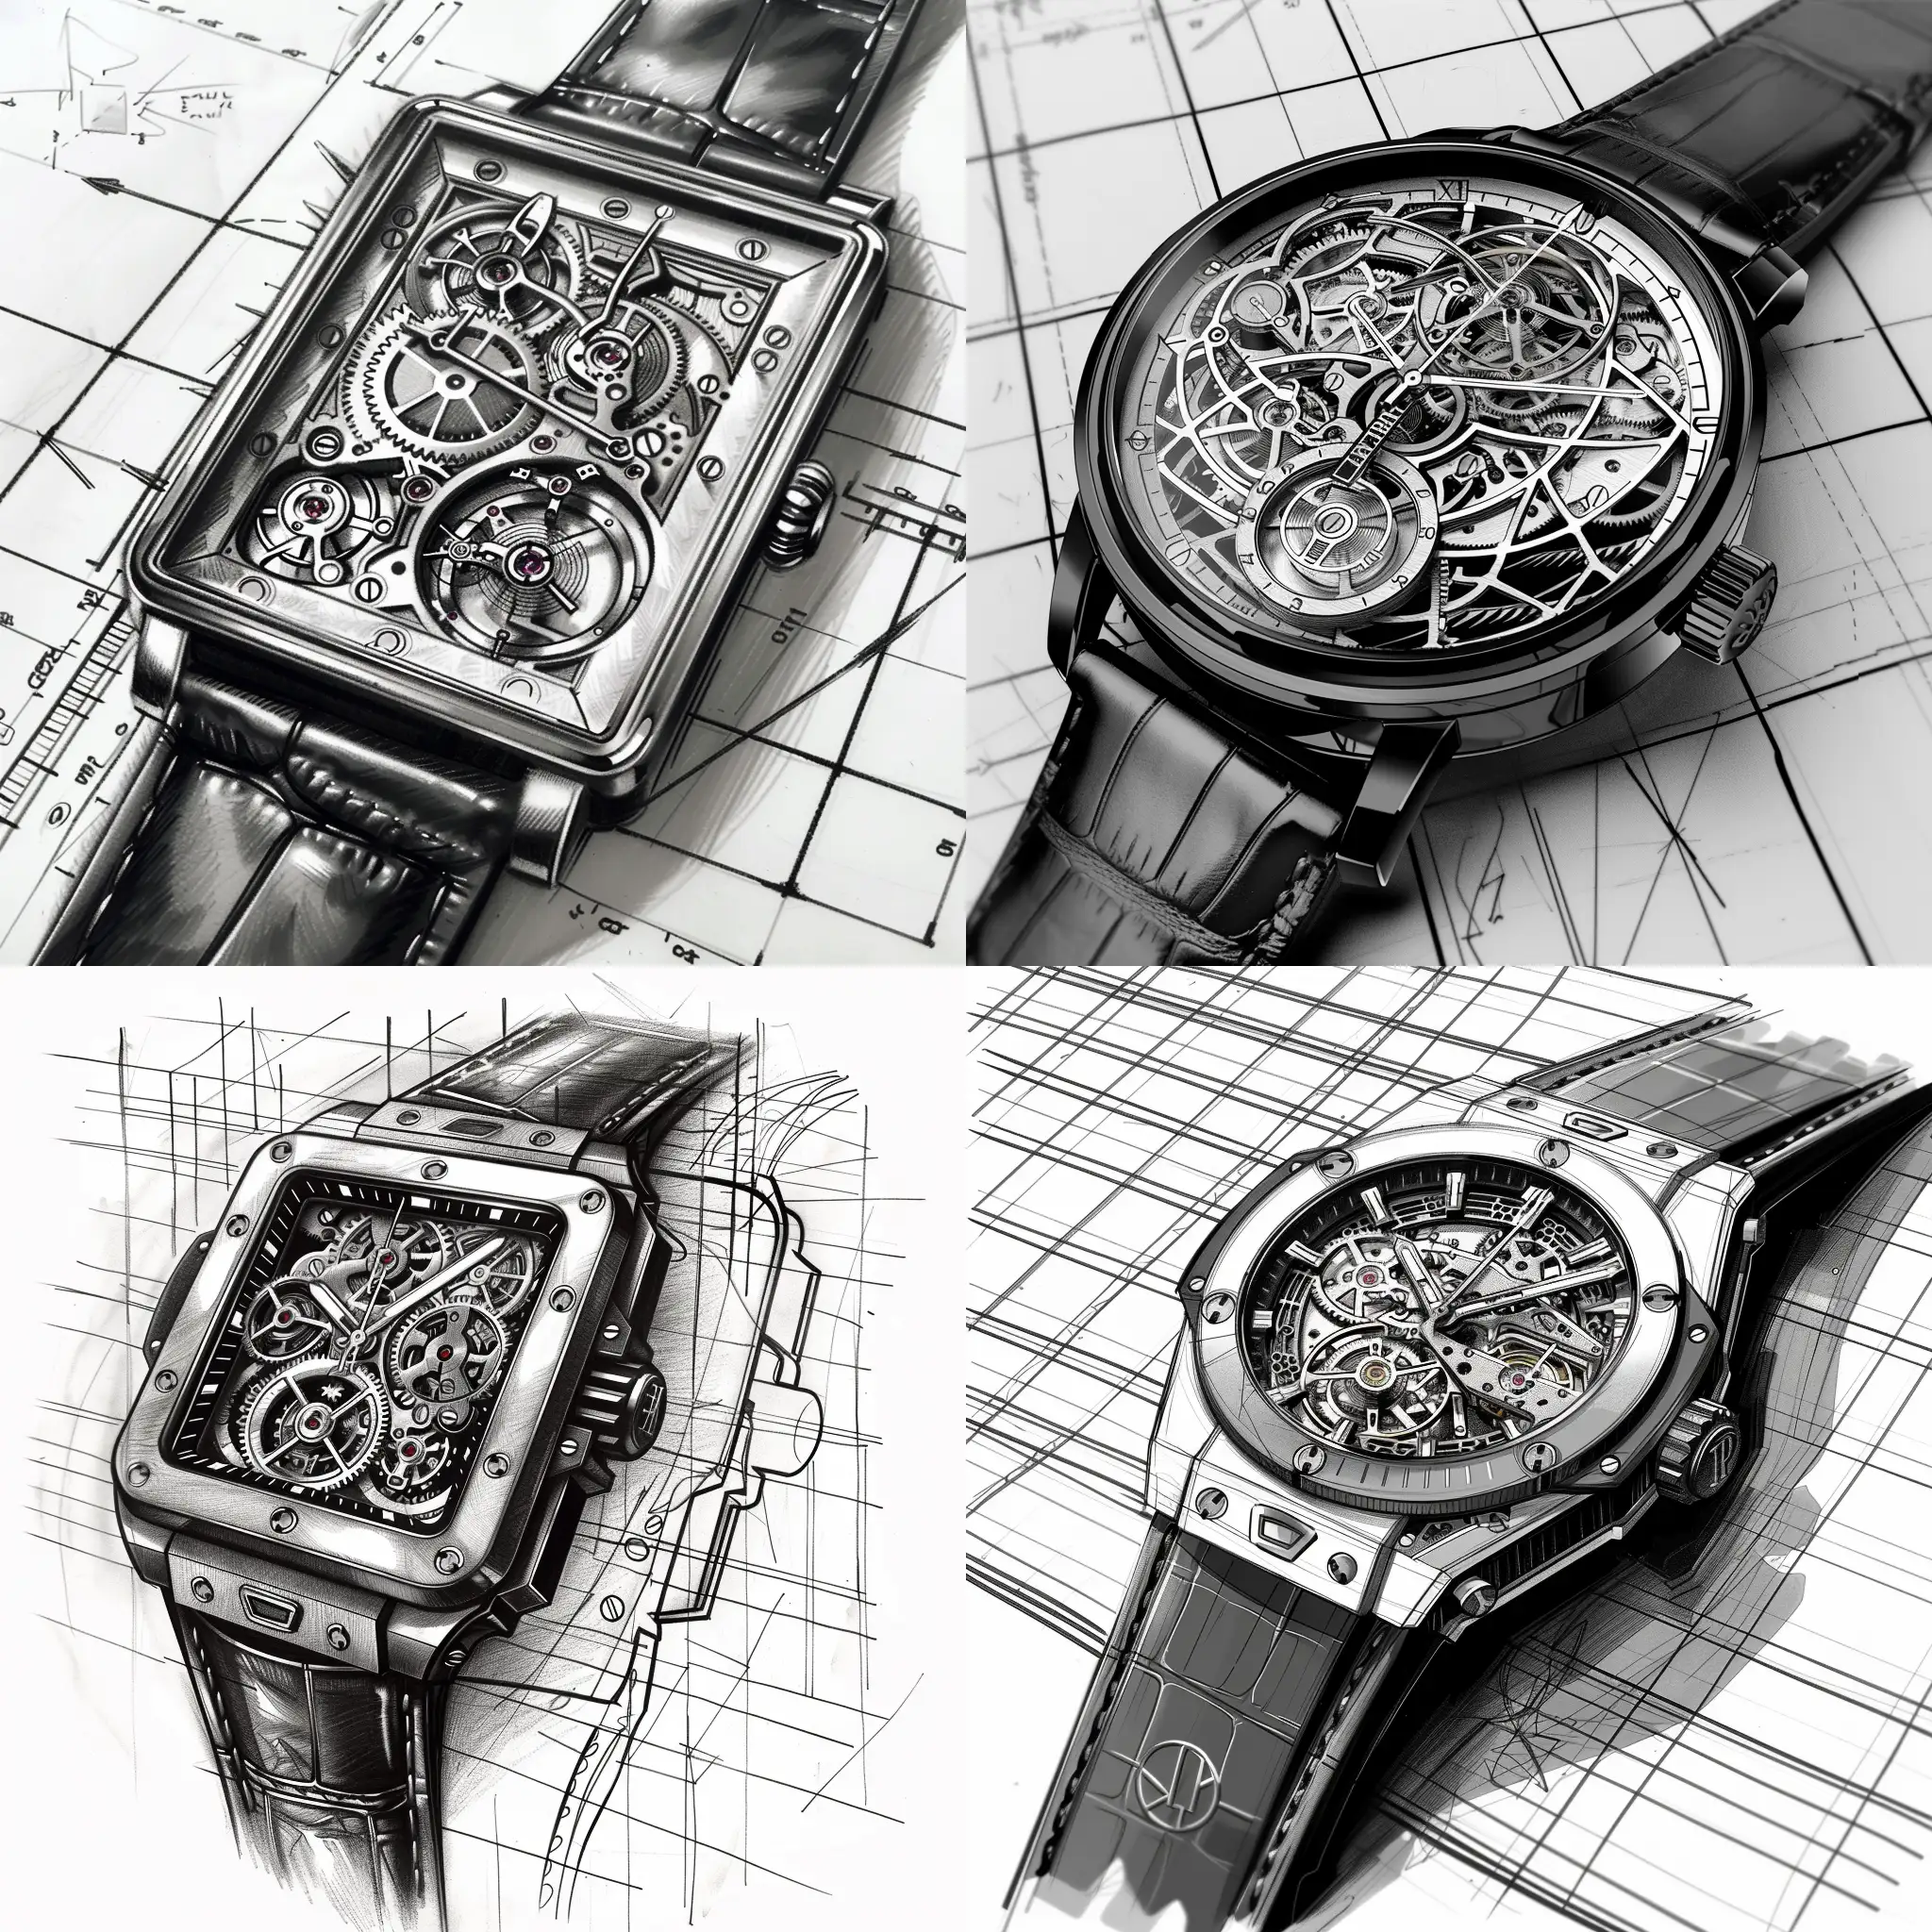 A detailed black and white technical drawing of a luxury wristwatch, revealing its intricate inner workings. The watch is full, centered, a  dorned with intricate gears, springs, and a refined mechanical movement. The overall design is a blend of classic and modern elements, with a focus on precision and elegance. The background consists of a well-organized grid, highlighting the meticulous nature of the plans.